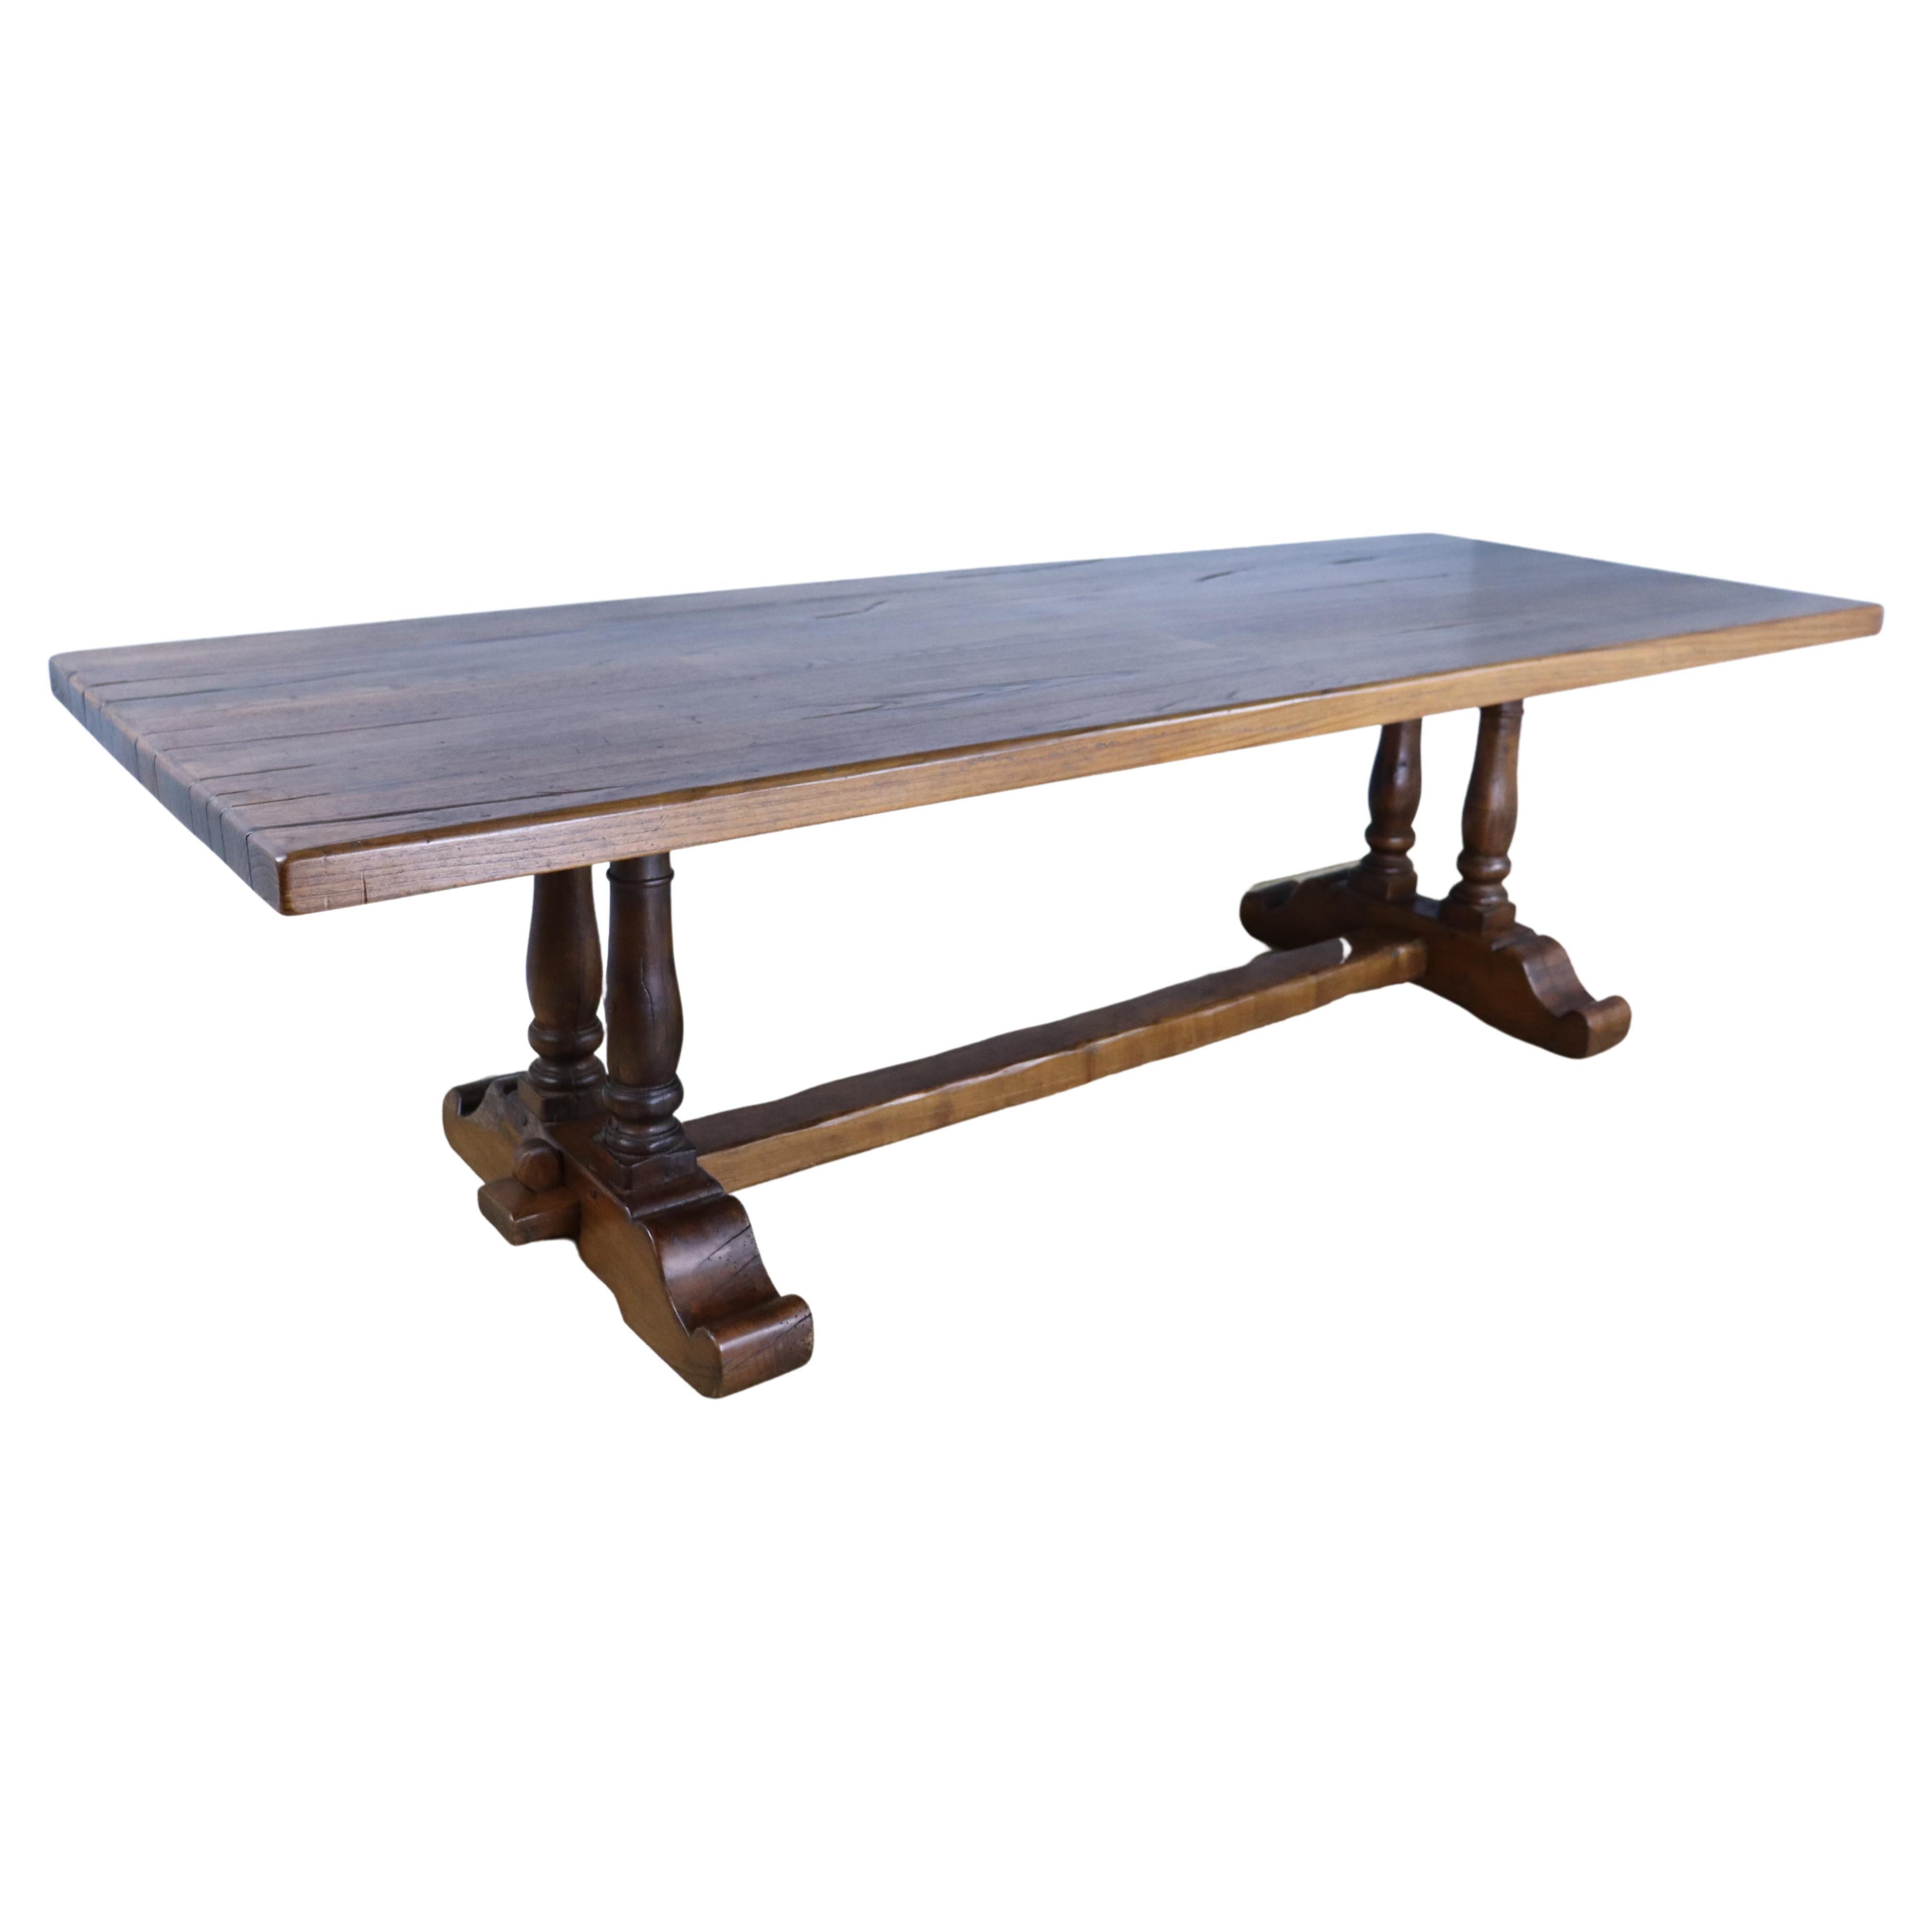 Imposing 19th Century Oak Dining Table with Double Barrel Supports For Sale